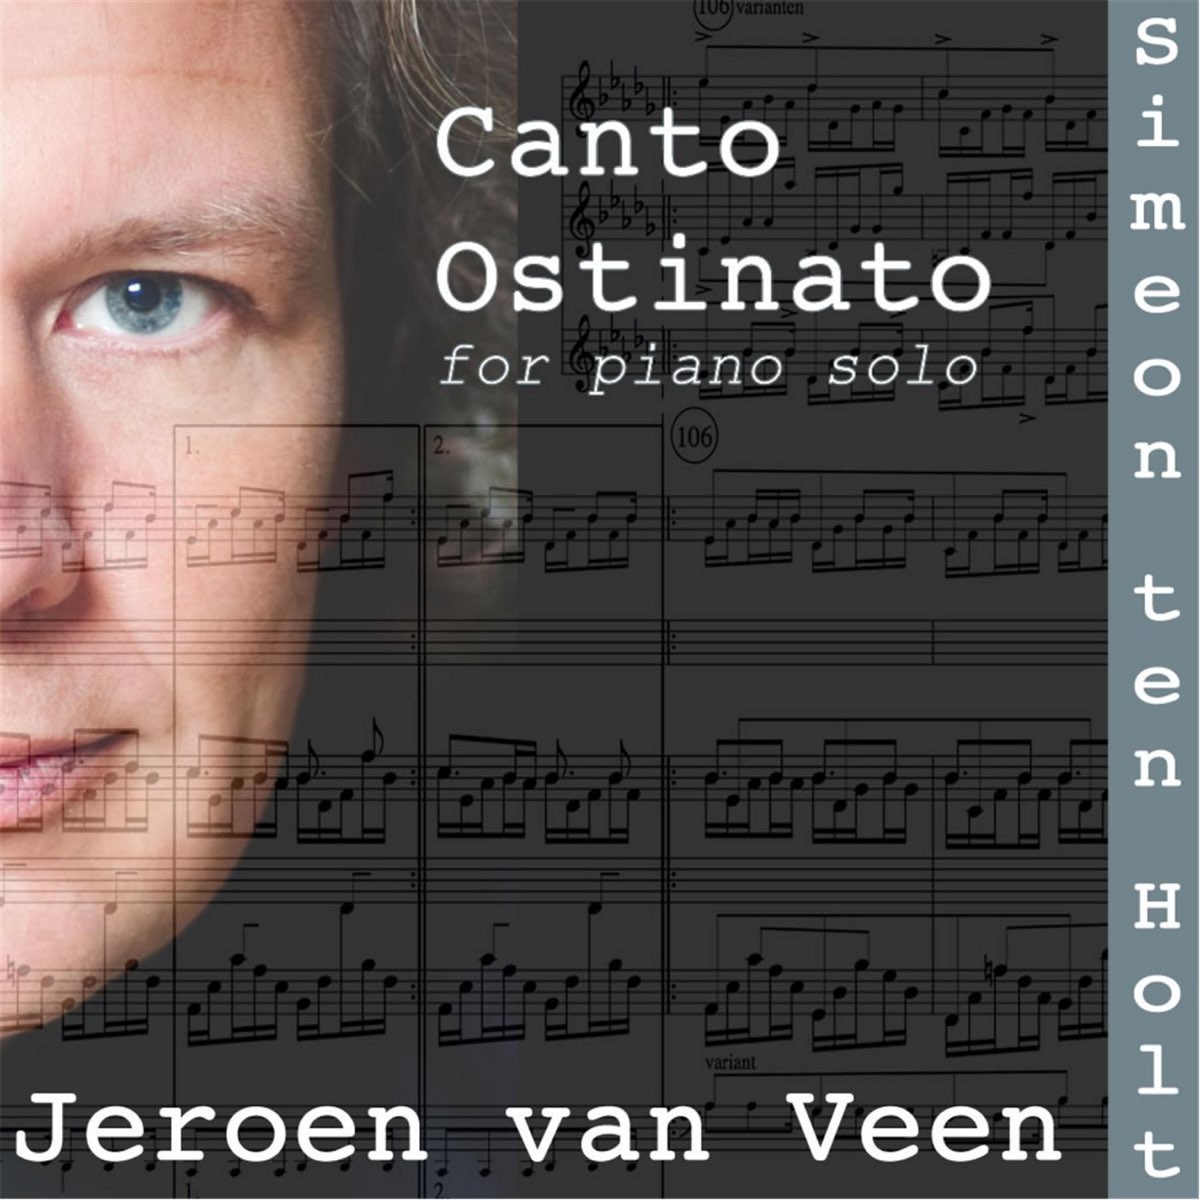 Canto Ostinato for Solo Piano - Single by Jeroen van Veen on Apple Music